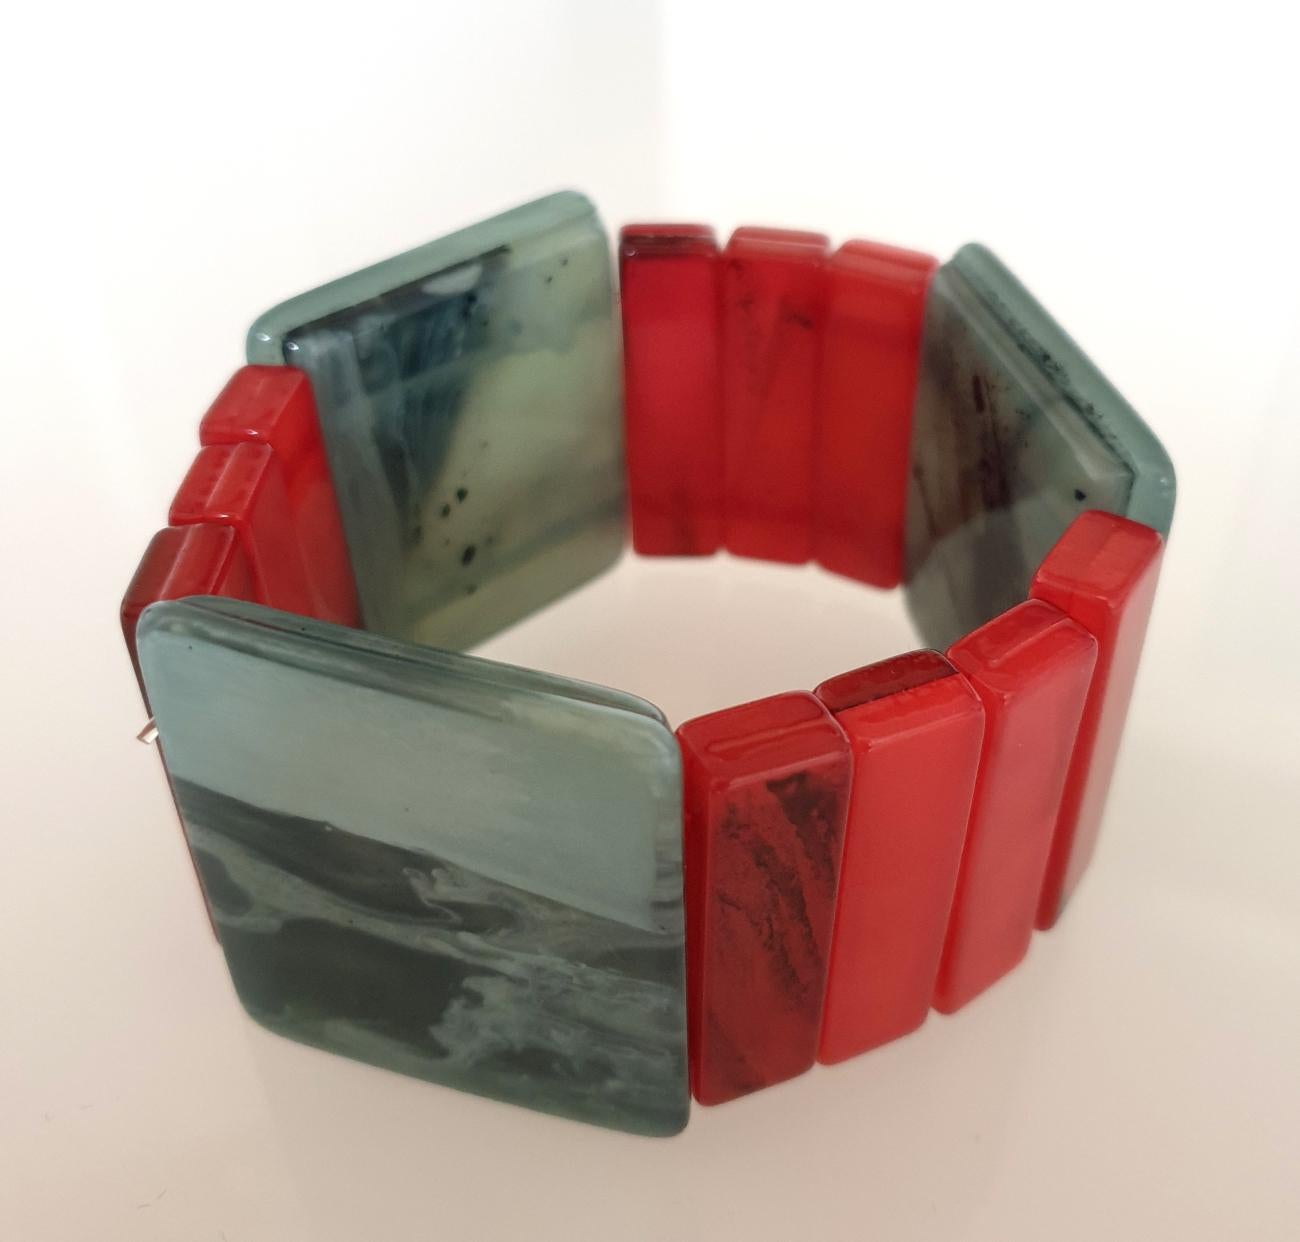 Mid Century Bakelite bracelet, France circa 1970s.
Some black veins on the Bakelite.
The Fuchsia and Blue elements are different in shape and height, 
giving a lot of style to the bracelet.
The light blue color has some gray hues.
Excellent